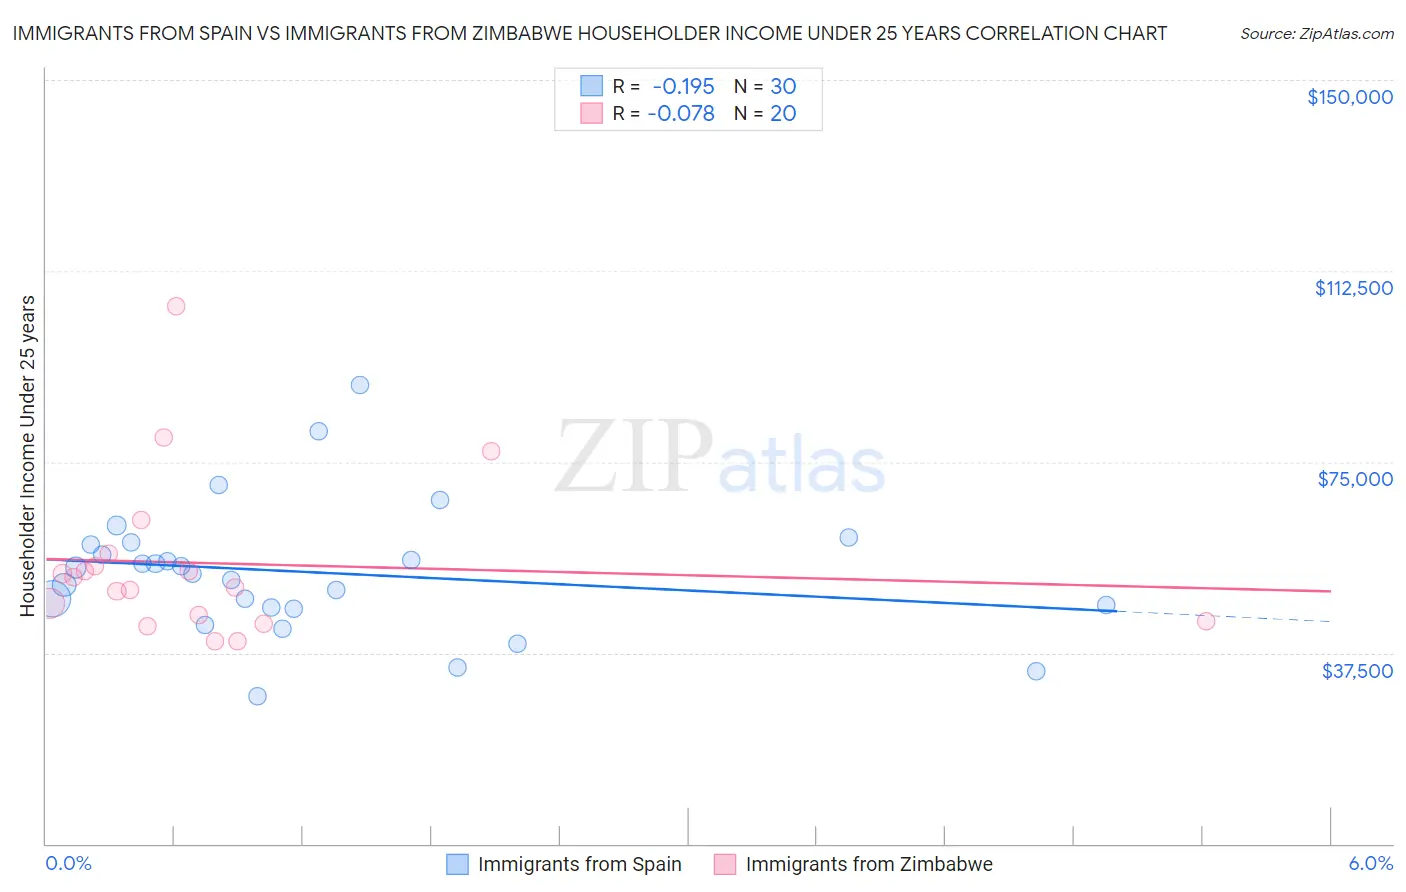 Immigrants from Spain vs Immigrants from Zimbabwe Householder Income Under 25 years